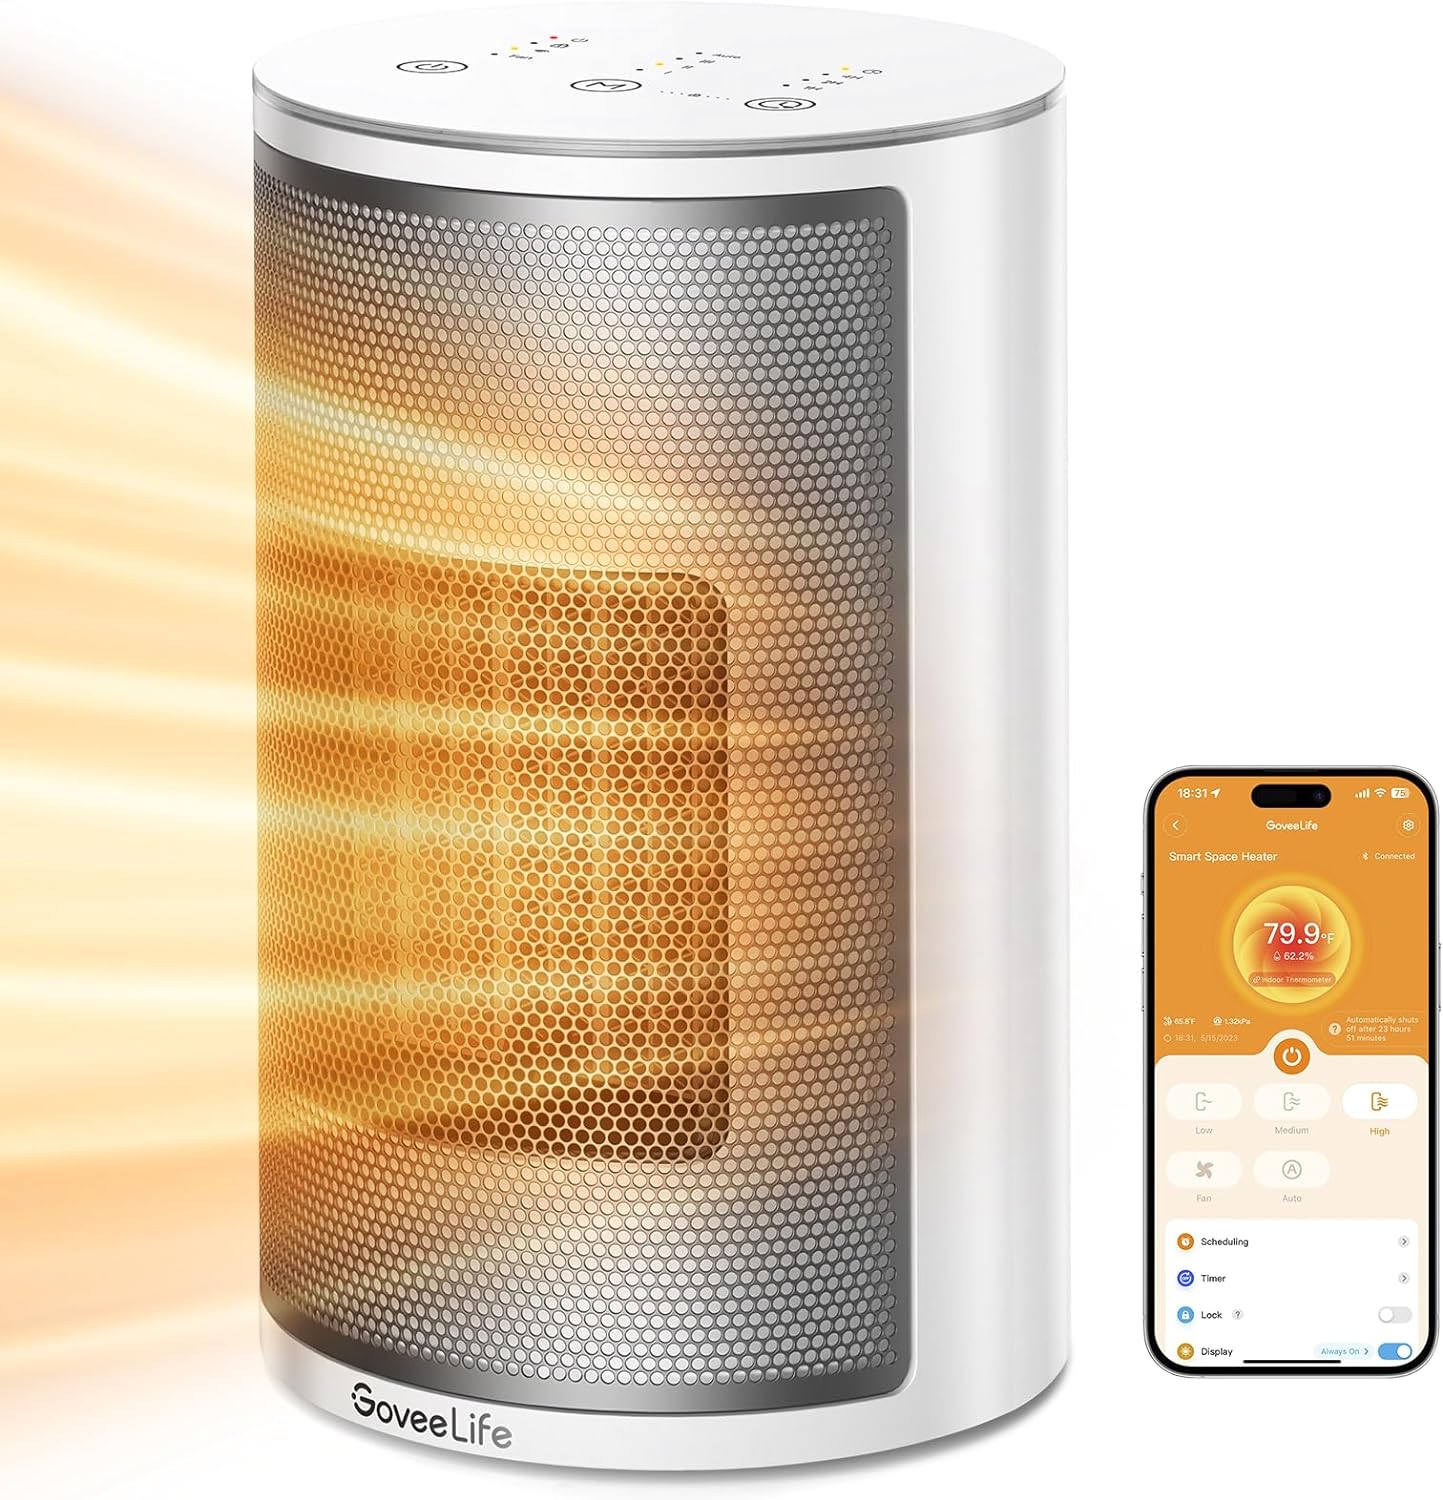 https://bigbigmart.com/wp-content/uploads/2023/11/GoveeLife-Smart-Space-Heater-for-Indoor-Use-1500W-Fast-Electric-Heater-with-Thermostat-Wi-Fi-App-Voice-Remote-Control-Small-Heater-Safety-for-Bedroom-Home-Indoors-Office-Desk-Portable-White.jpg